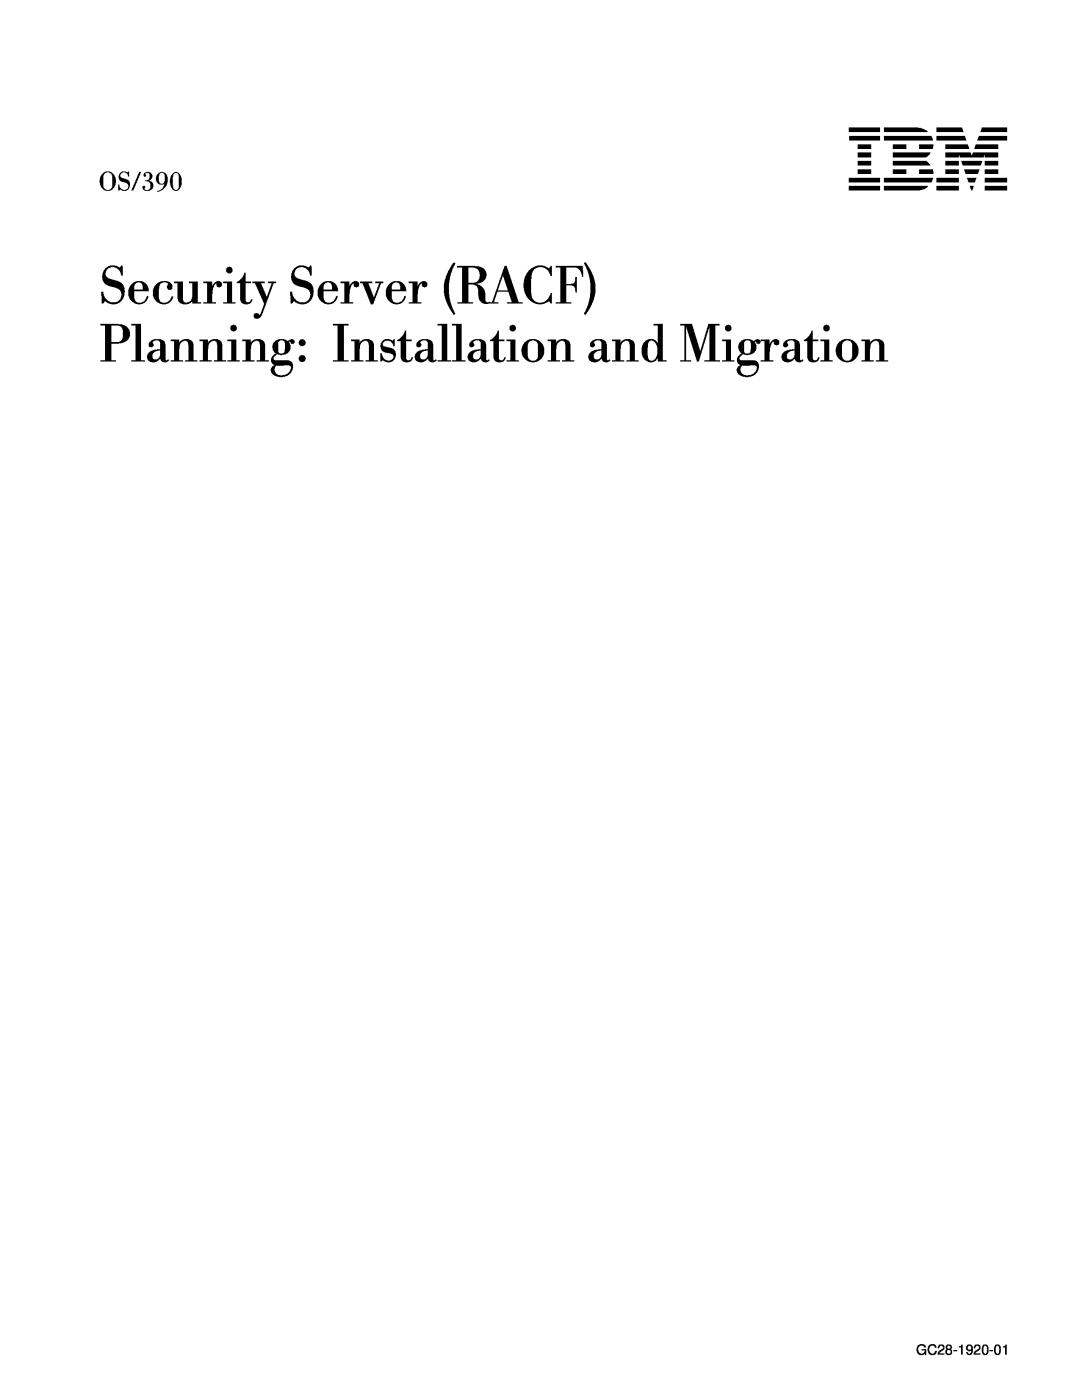 IBM GC28-1920-01 manual Security Server RACF Planning Installation and Migration, OS/390 